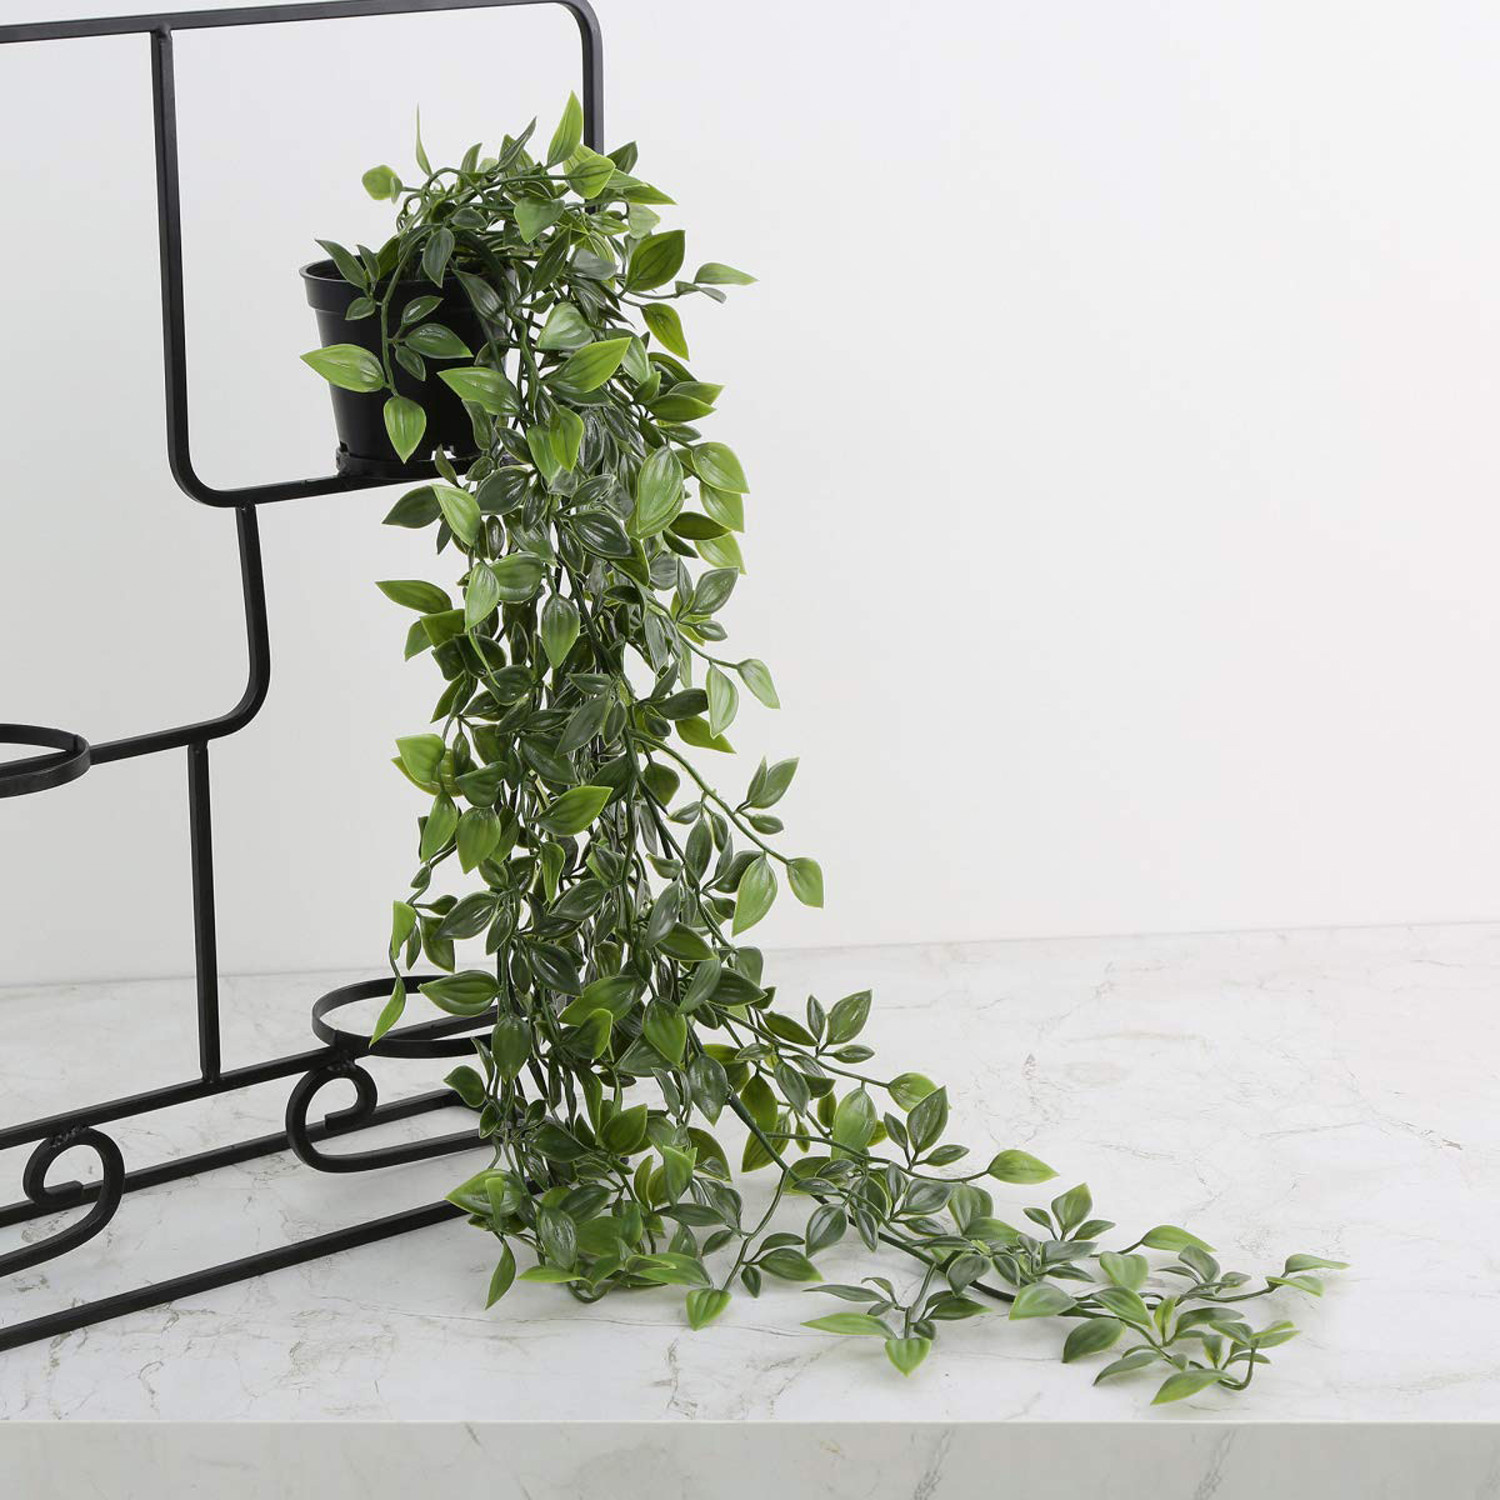 Kuber Industries Mini Plastic Potted Vine Plant for Home Office Decoration, Plastic Vine with Black Plastic Pots, Fake Plant for Bathroom Décor, Green-33_S_KUBQMART11602